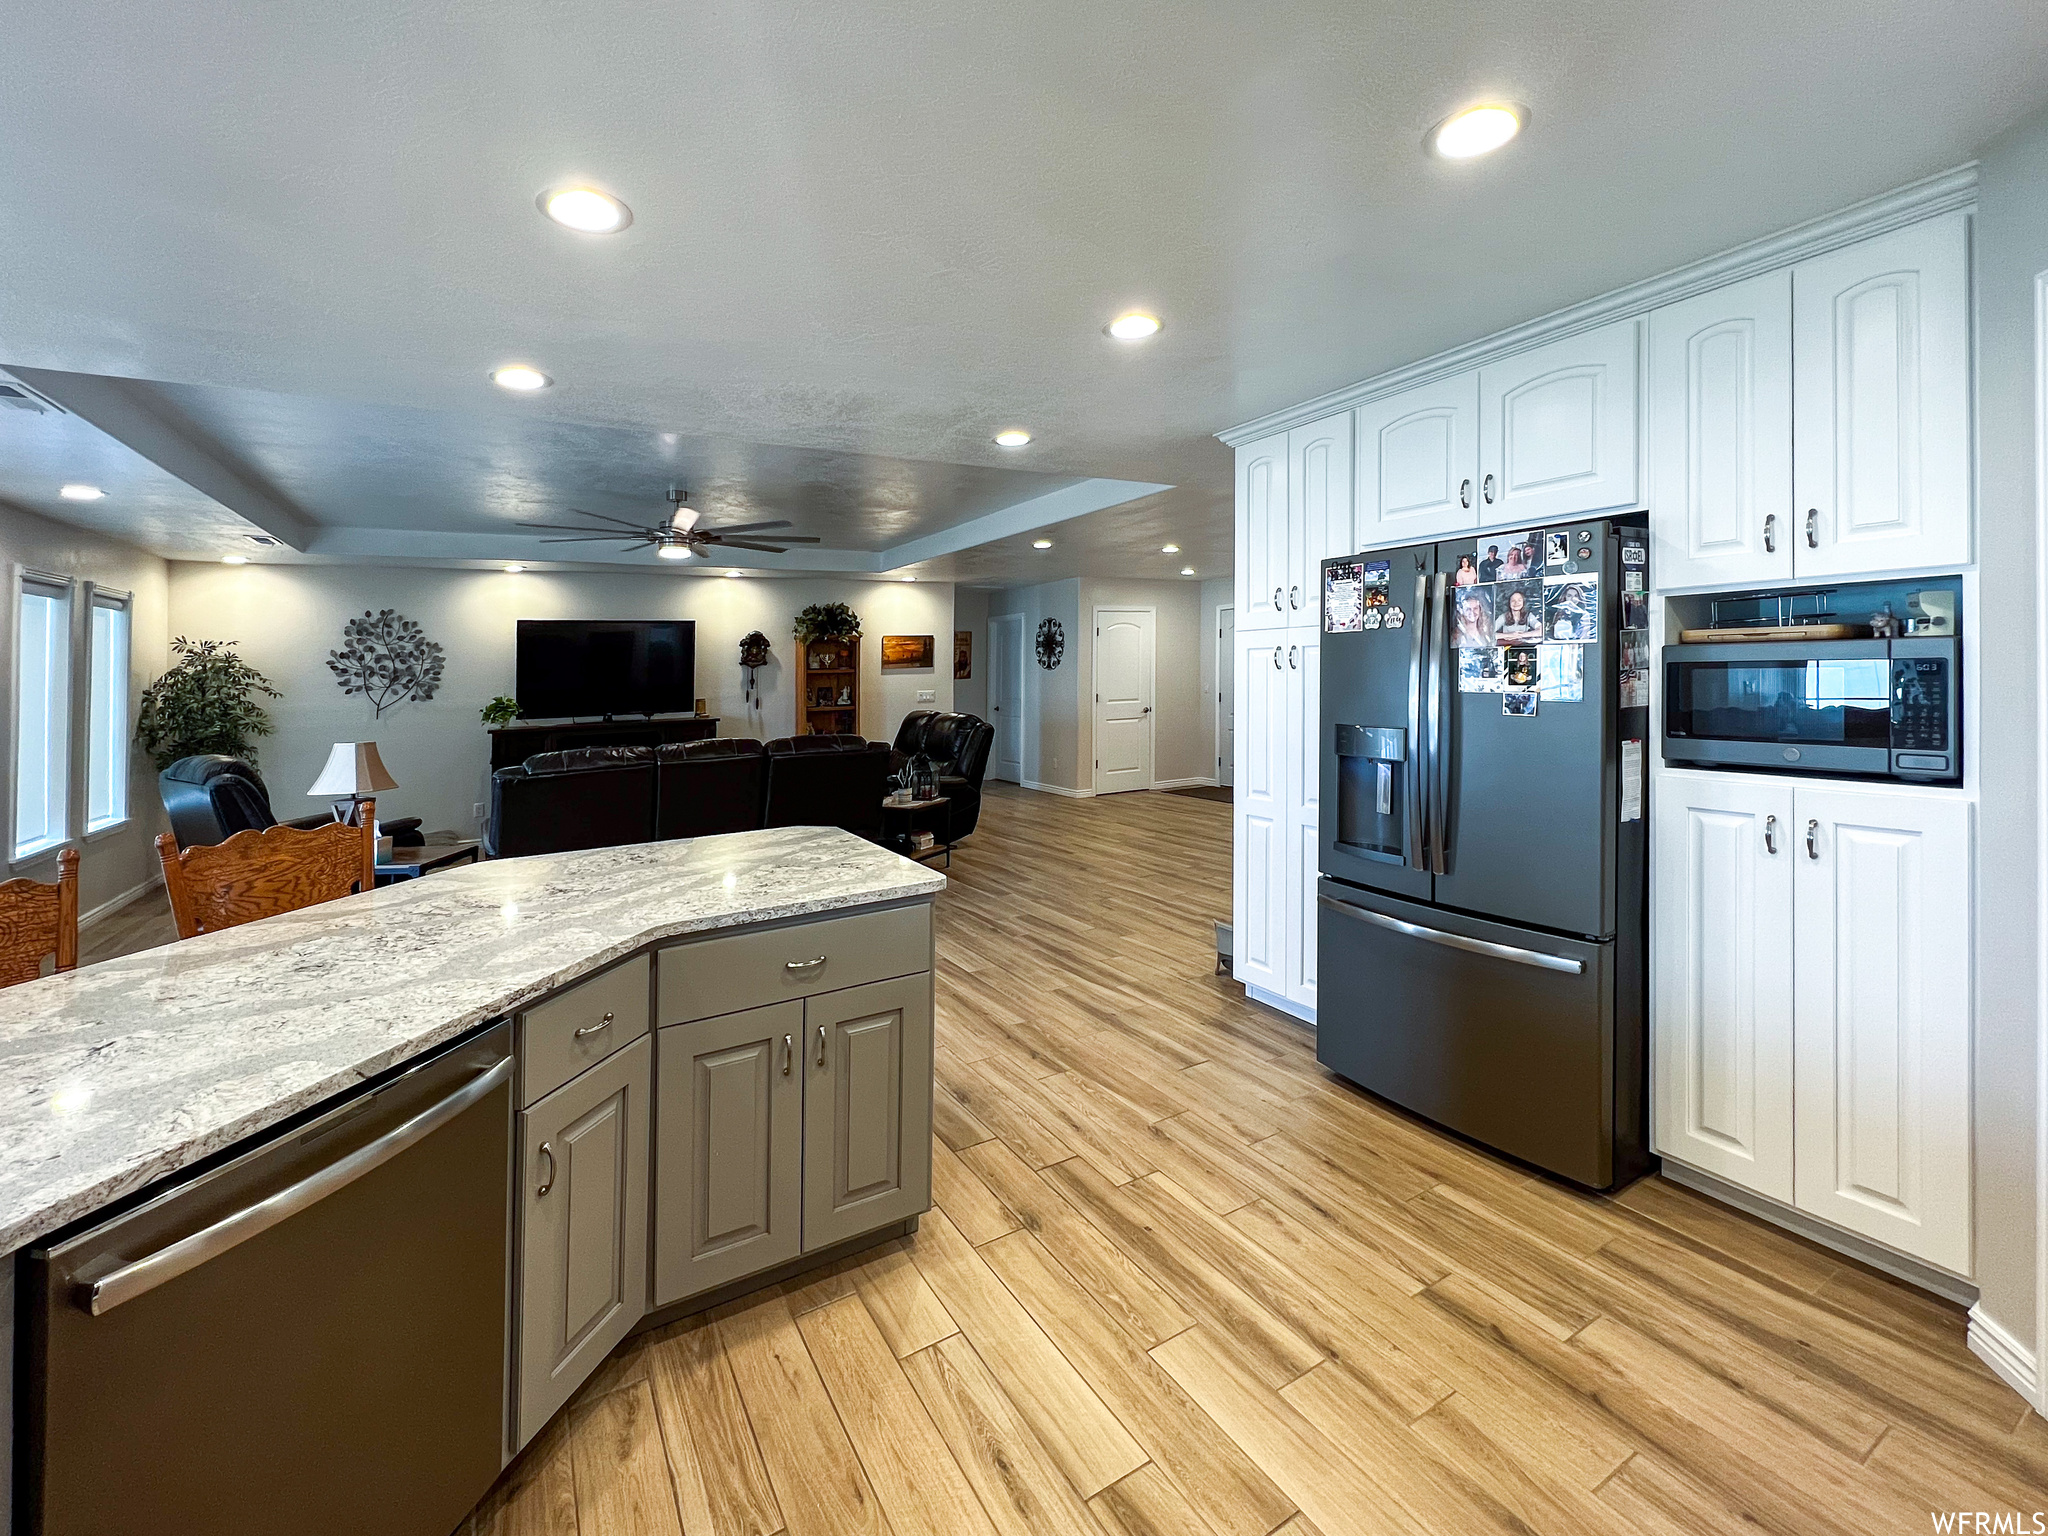 Kitchen with a dishwasher, microwave, refrigerator, light colored floors, light stone countertops, and white cabinets